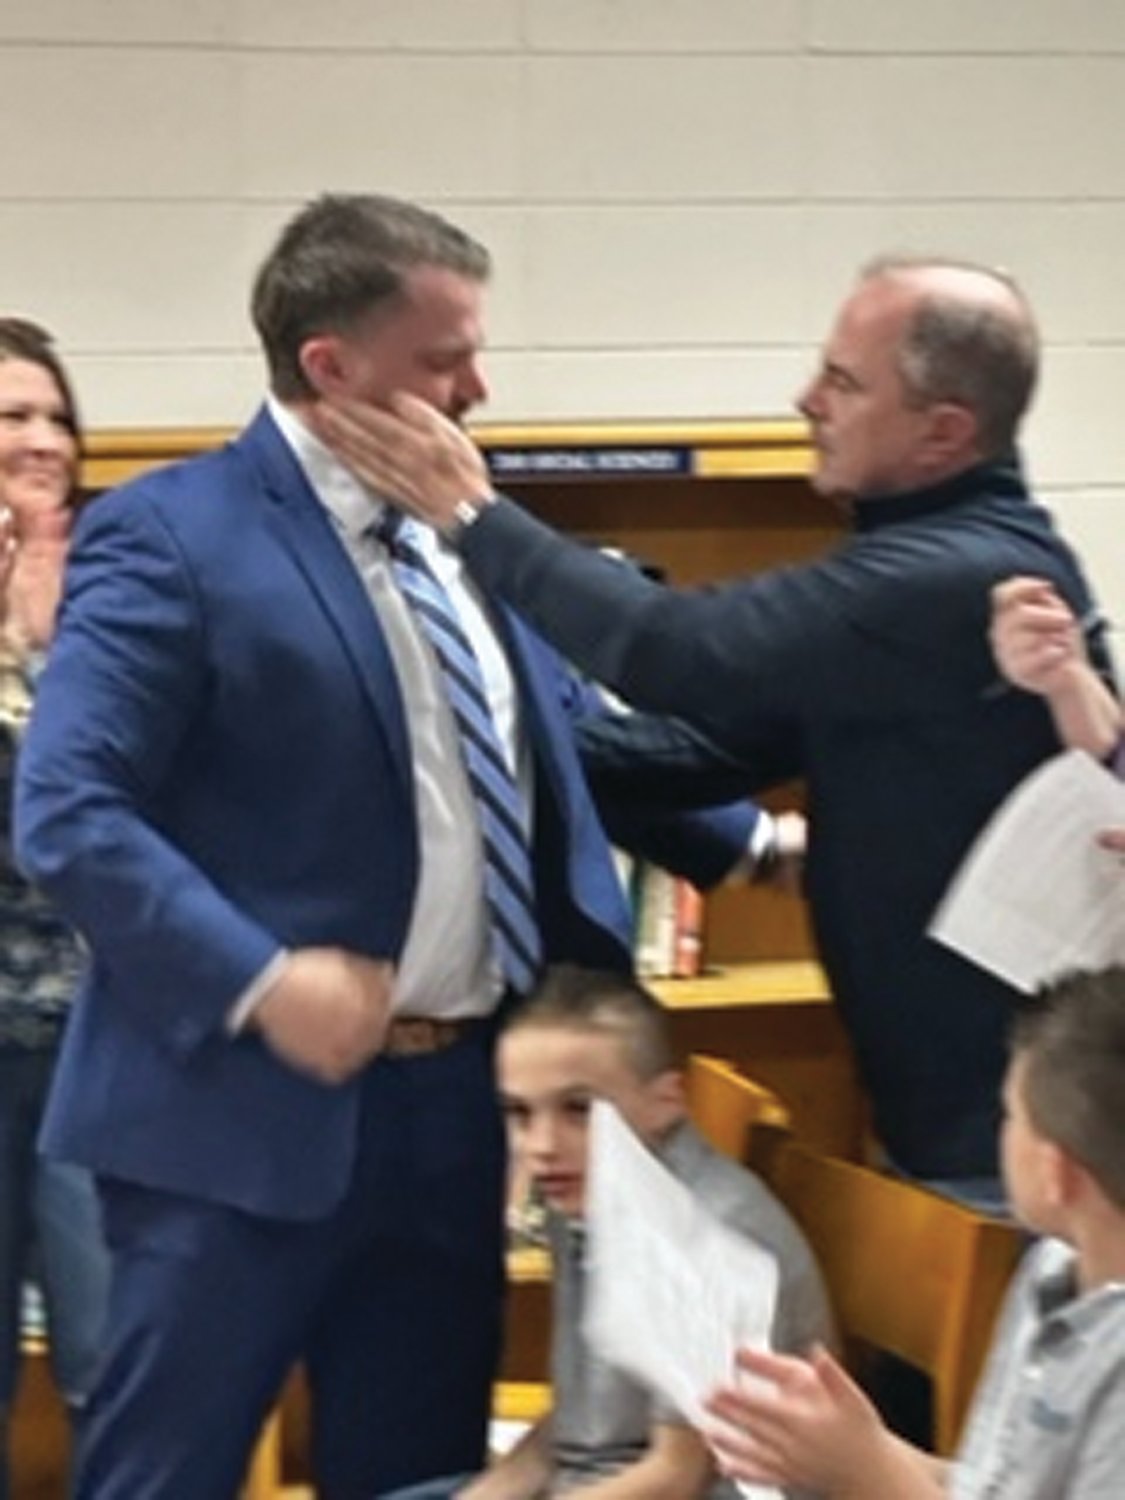 HUGS ALL AROUND: Matt Velino, the now former assistant principal at Johnston Senior High School has been promoted to the school’s top administrator post — the Principal.